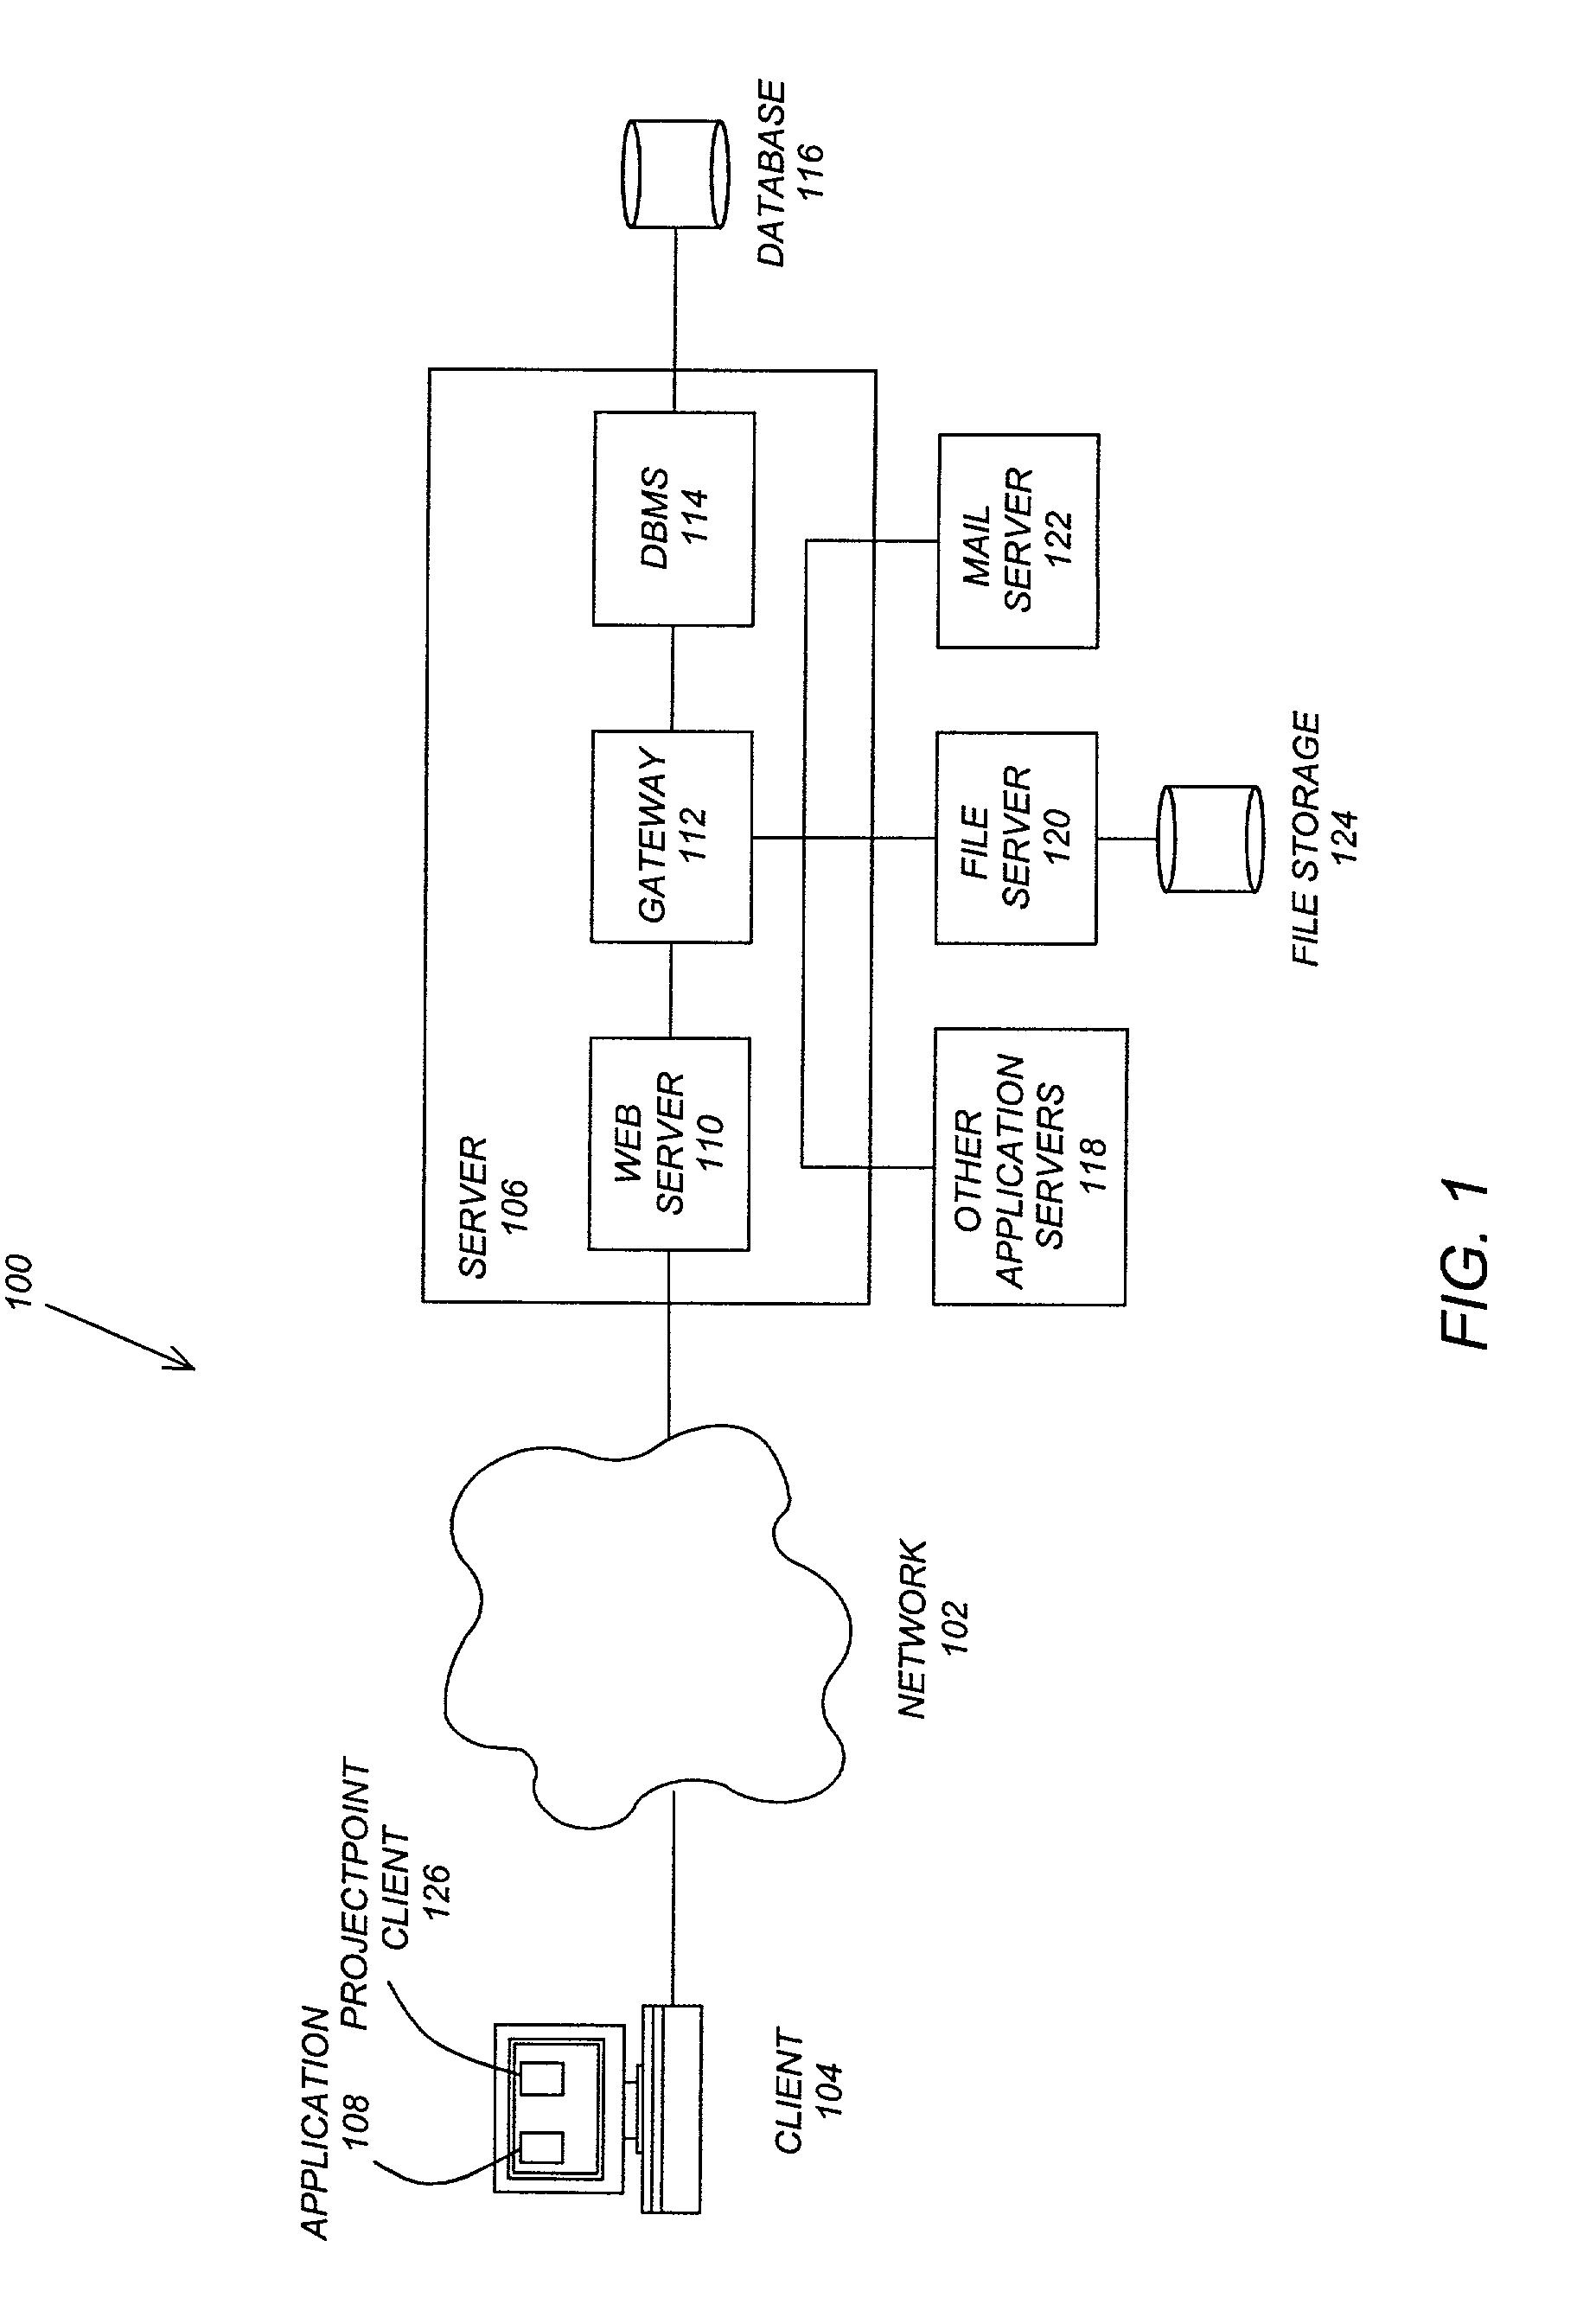 Method and apparatus for providing drawing collaboration on a network